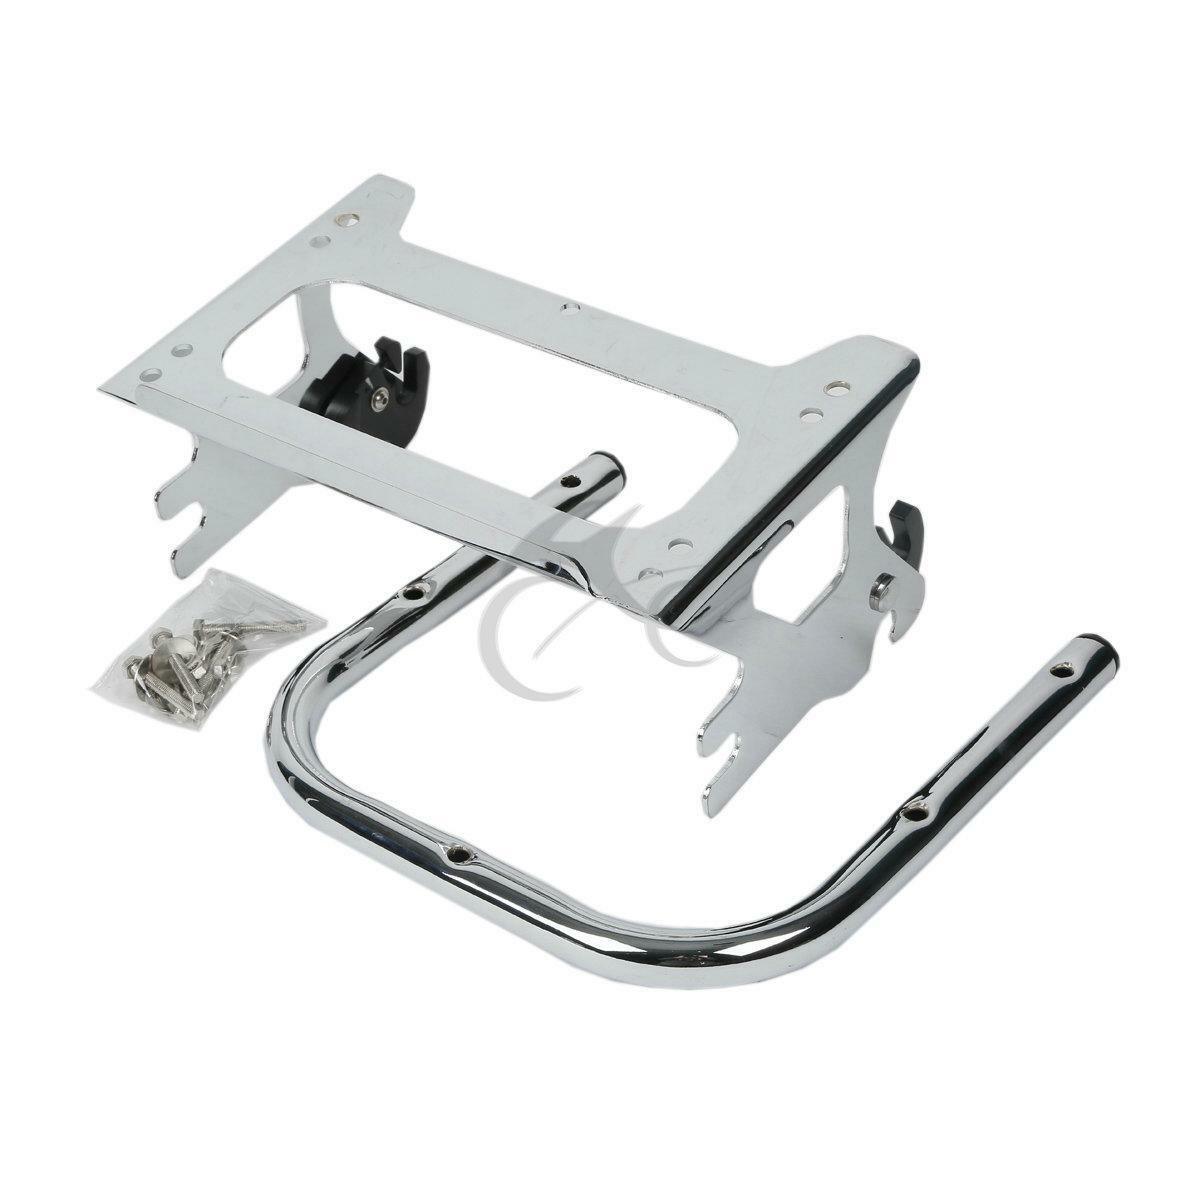 Pack Luggage Rack & Docking Hardware Fit For Harley Tour Pak Touring Glide 97-08 - Moto Life Products